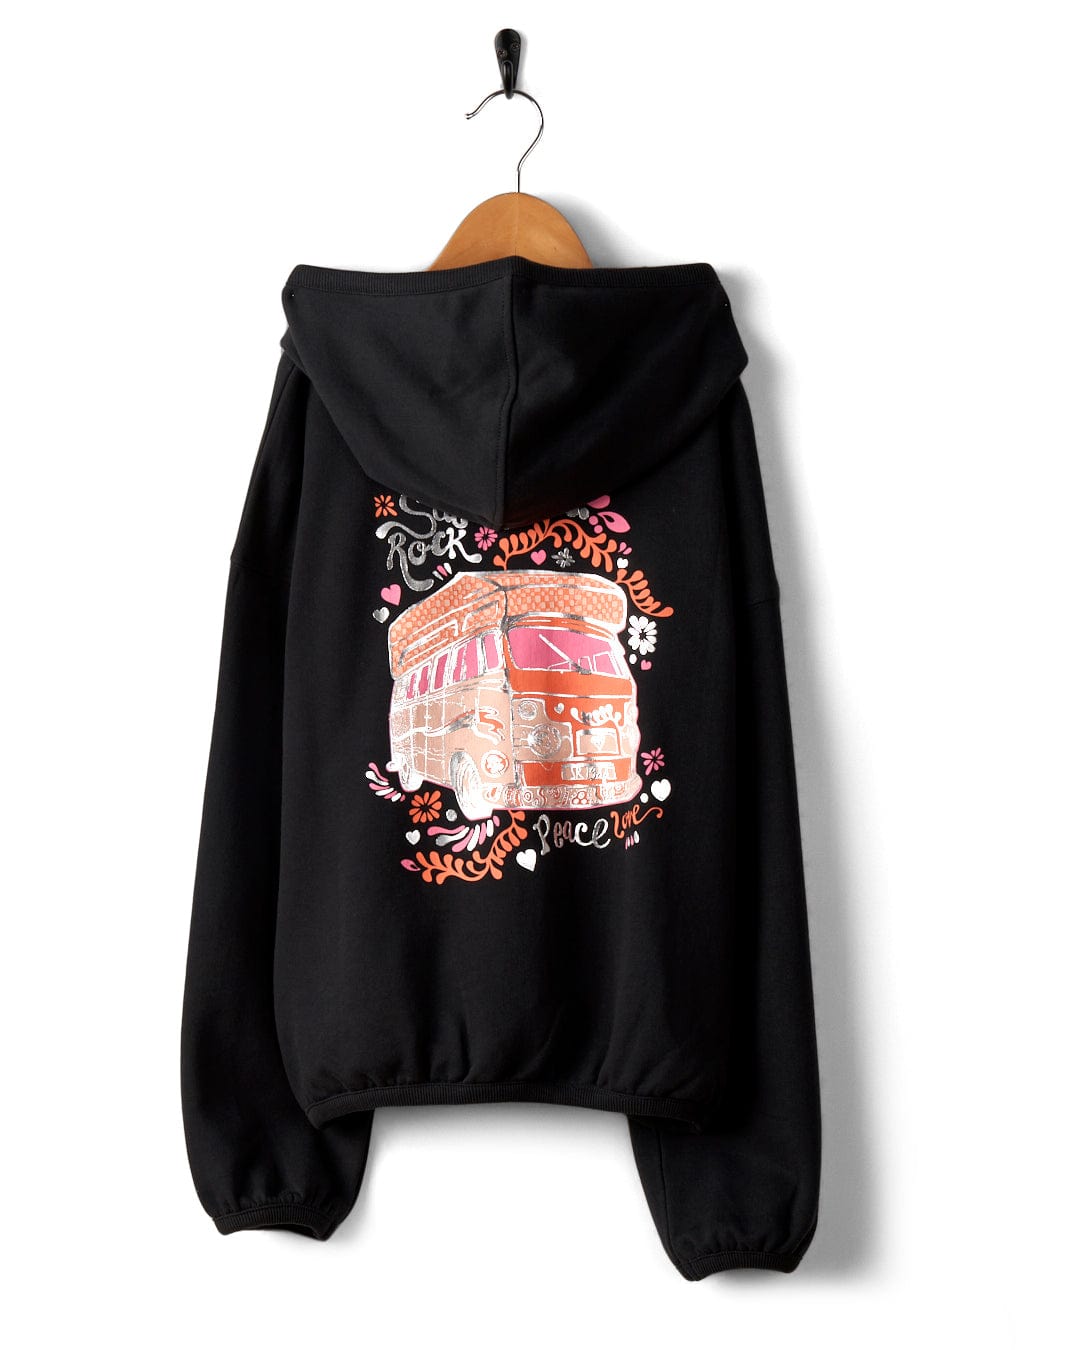 Tahiti Van - Kids Zip Hoodie - Washed Black hanging on a wooden hanger, featuring a colorful graphic print of a building with the text "rock 'n' roll" above and "peace" below.